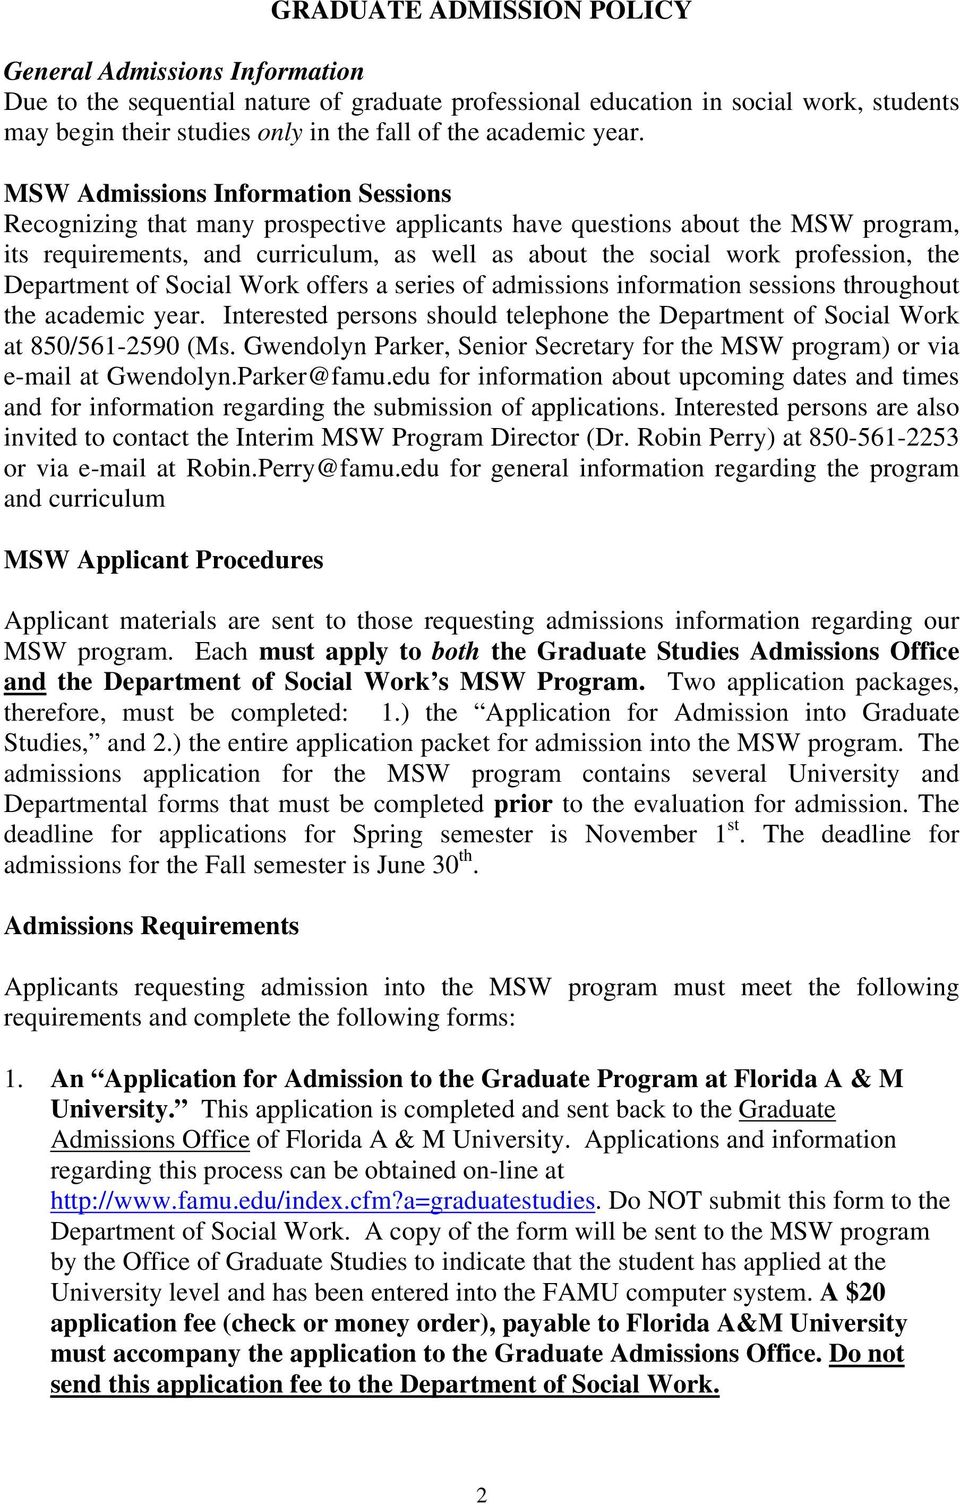 MSW Admissions Information Sessions Recognizing that many prospective applicants have questions about the MSW program, its requirements, and curriculum, as well as about the social work profession,